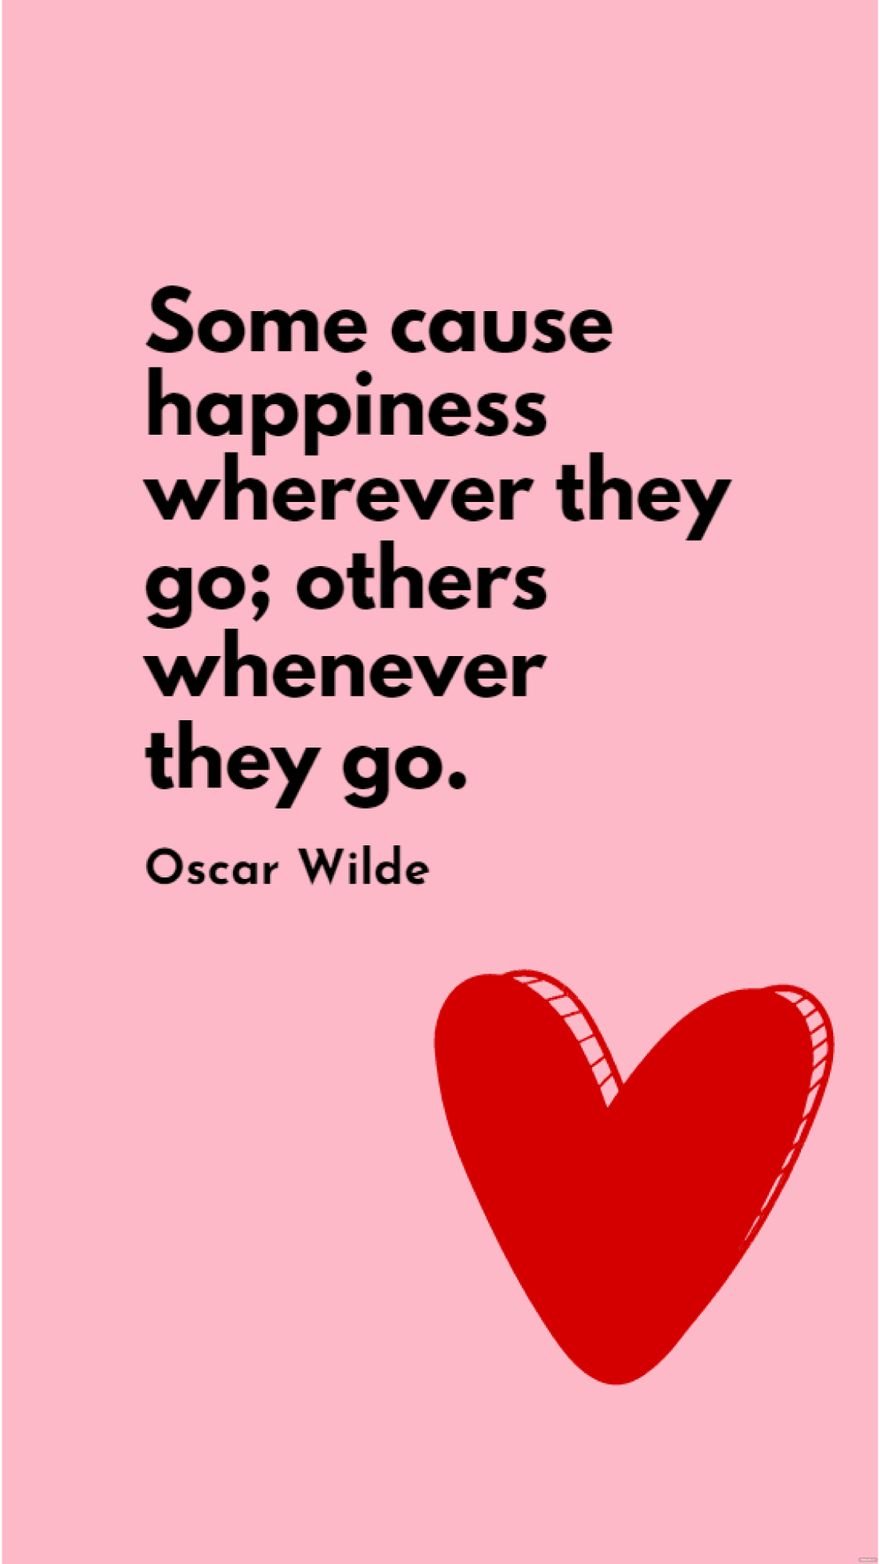 Oscar Wilde - Some cause happiness wherever they go; others whenever they go.